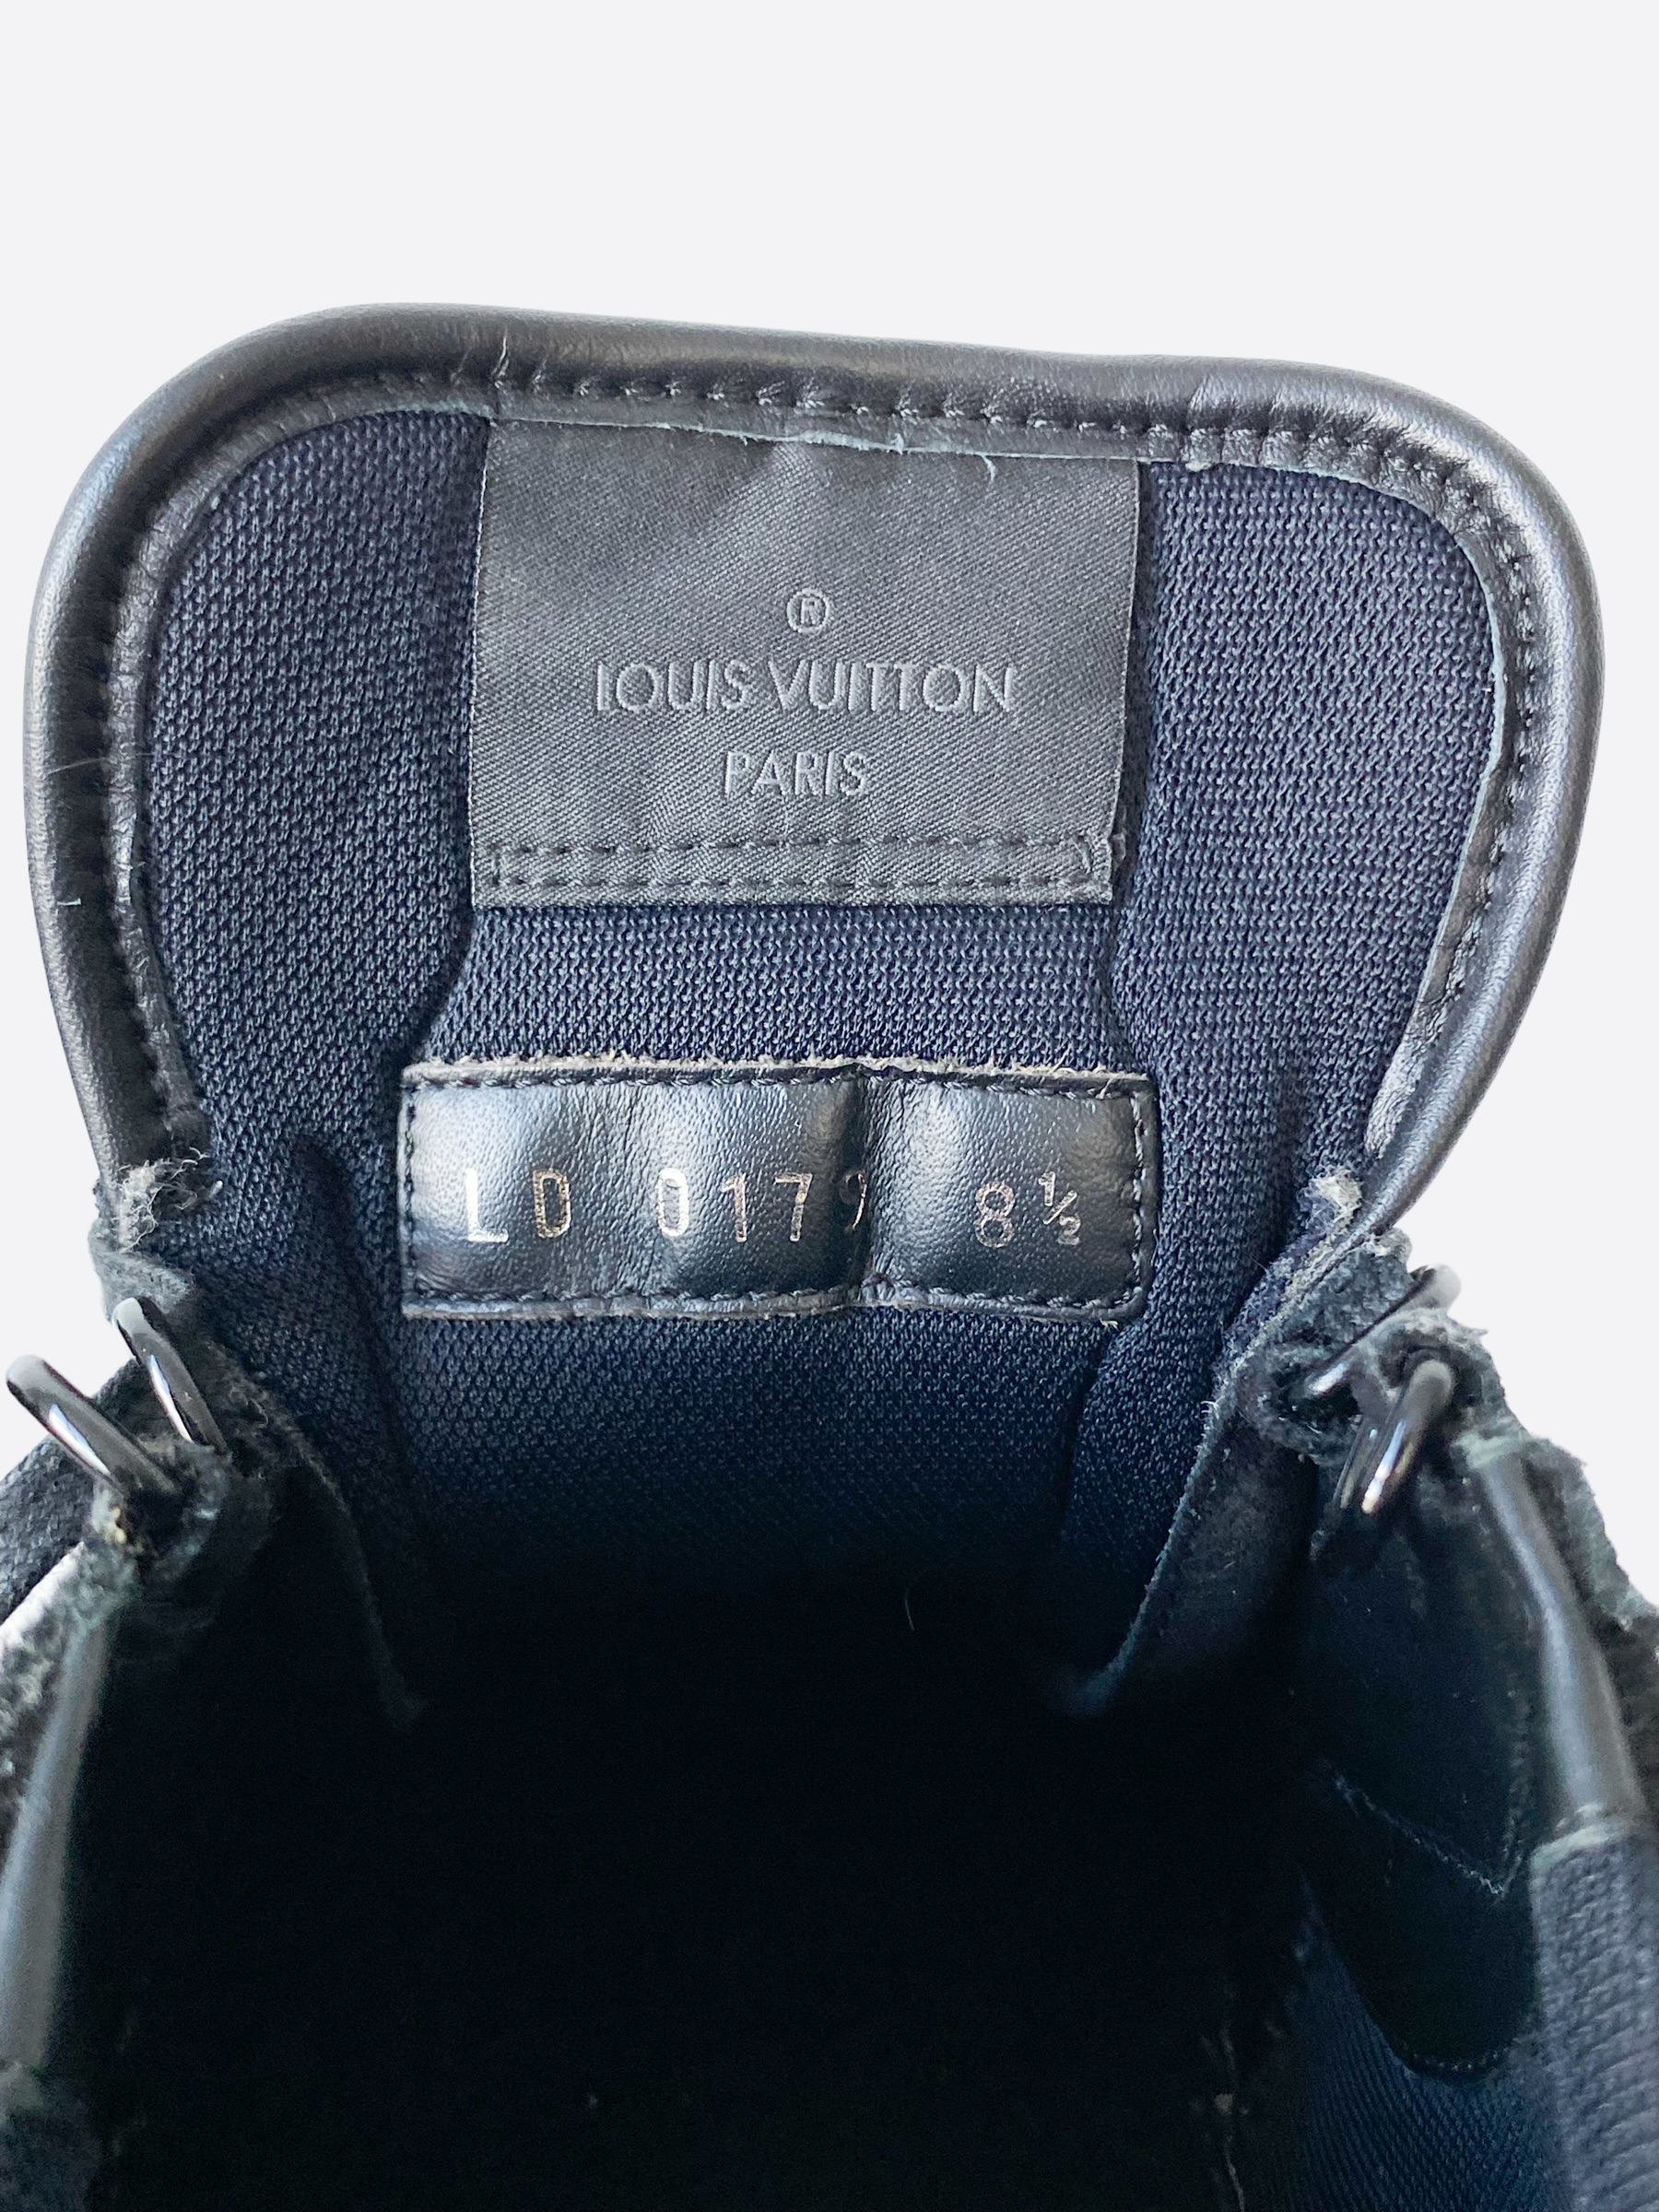 Louis Vuitton is in Their Bag with New Trainer